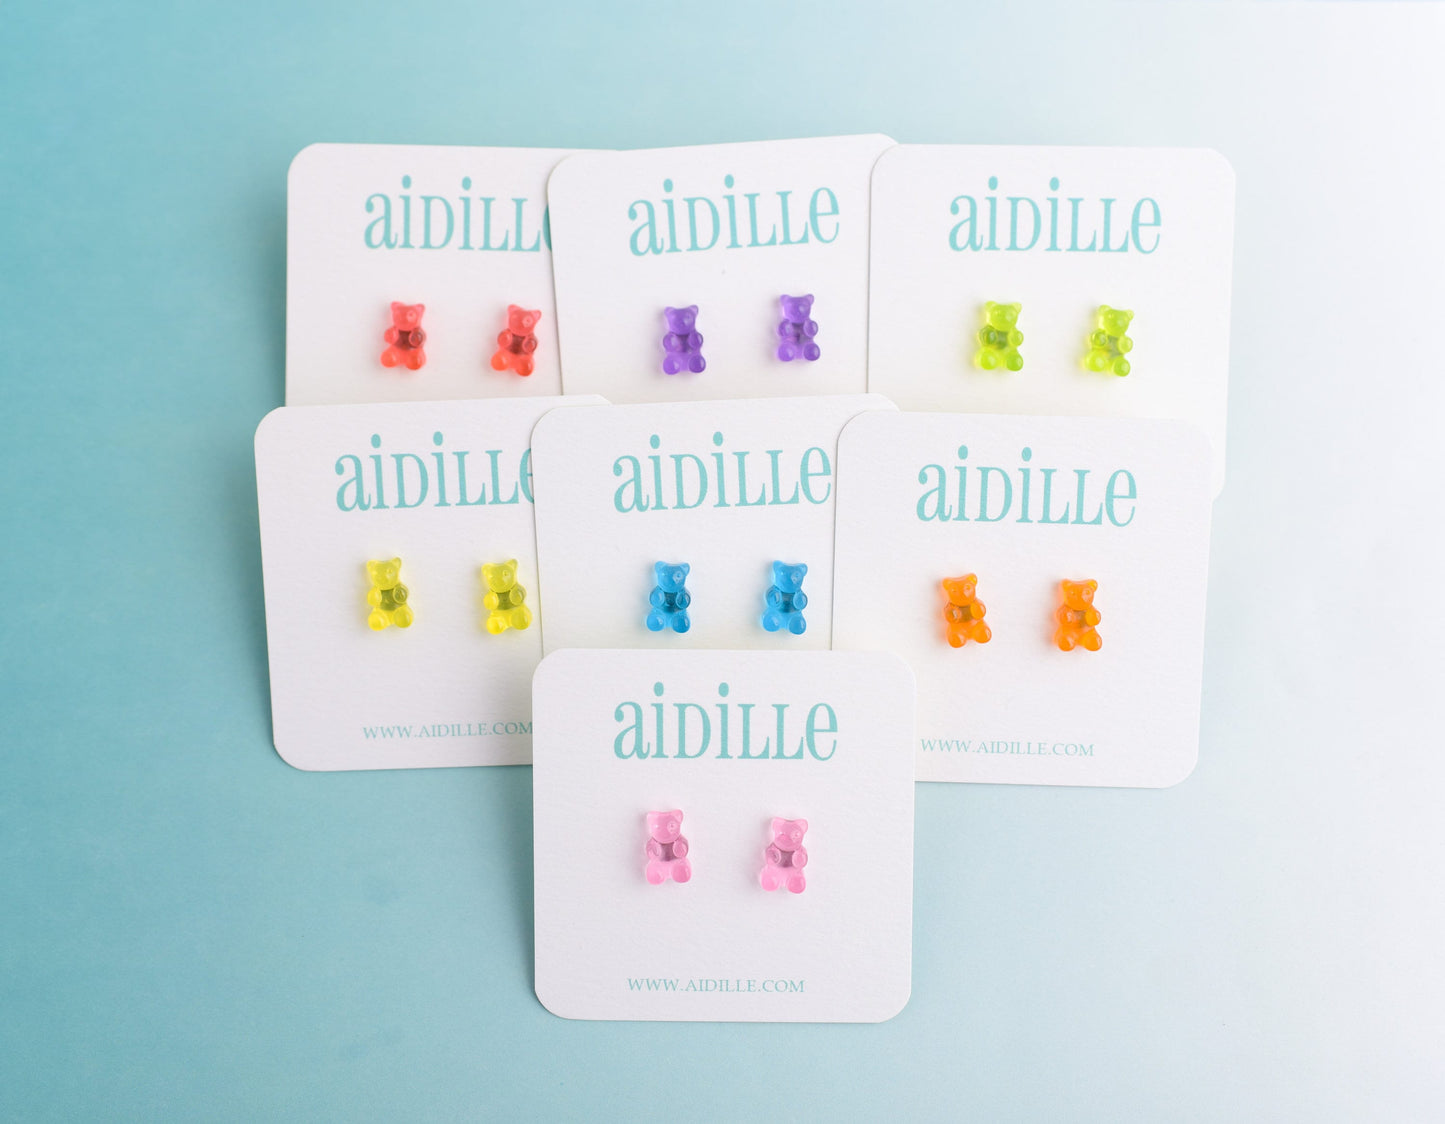 Little Gummy Bear Earrings with Titanium Posts- Choose Your Color